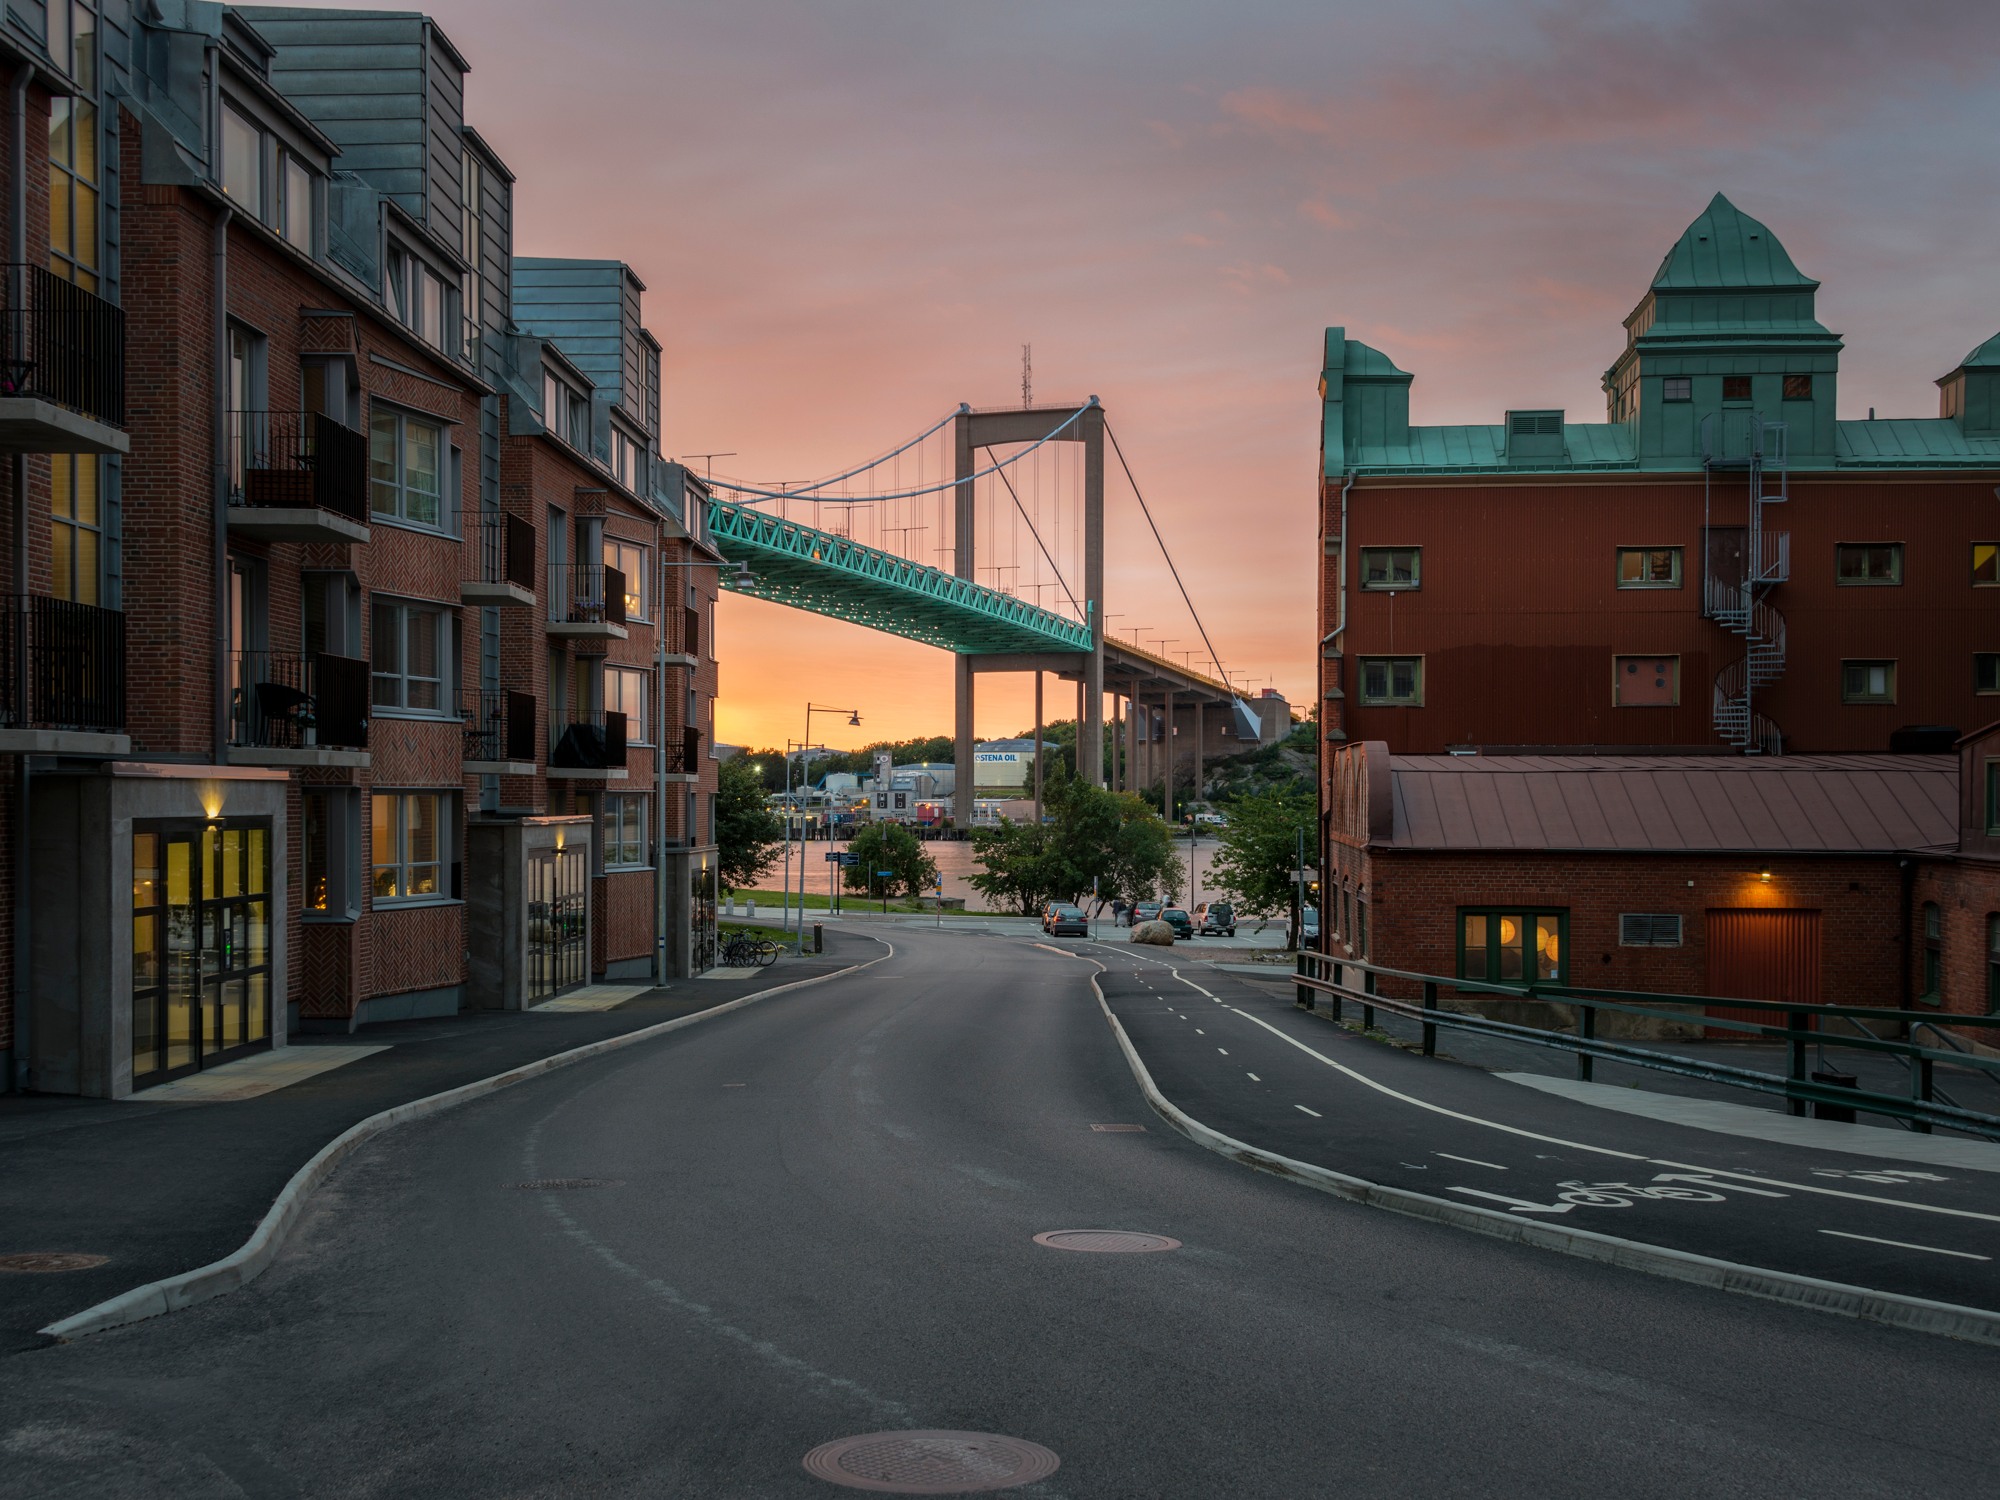 View of a sunset from a street overlooking a bridge.